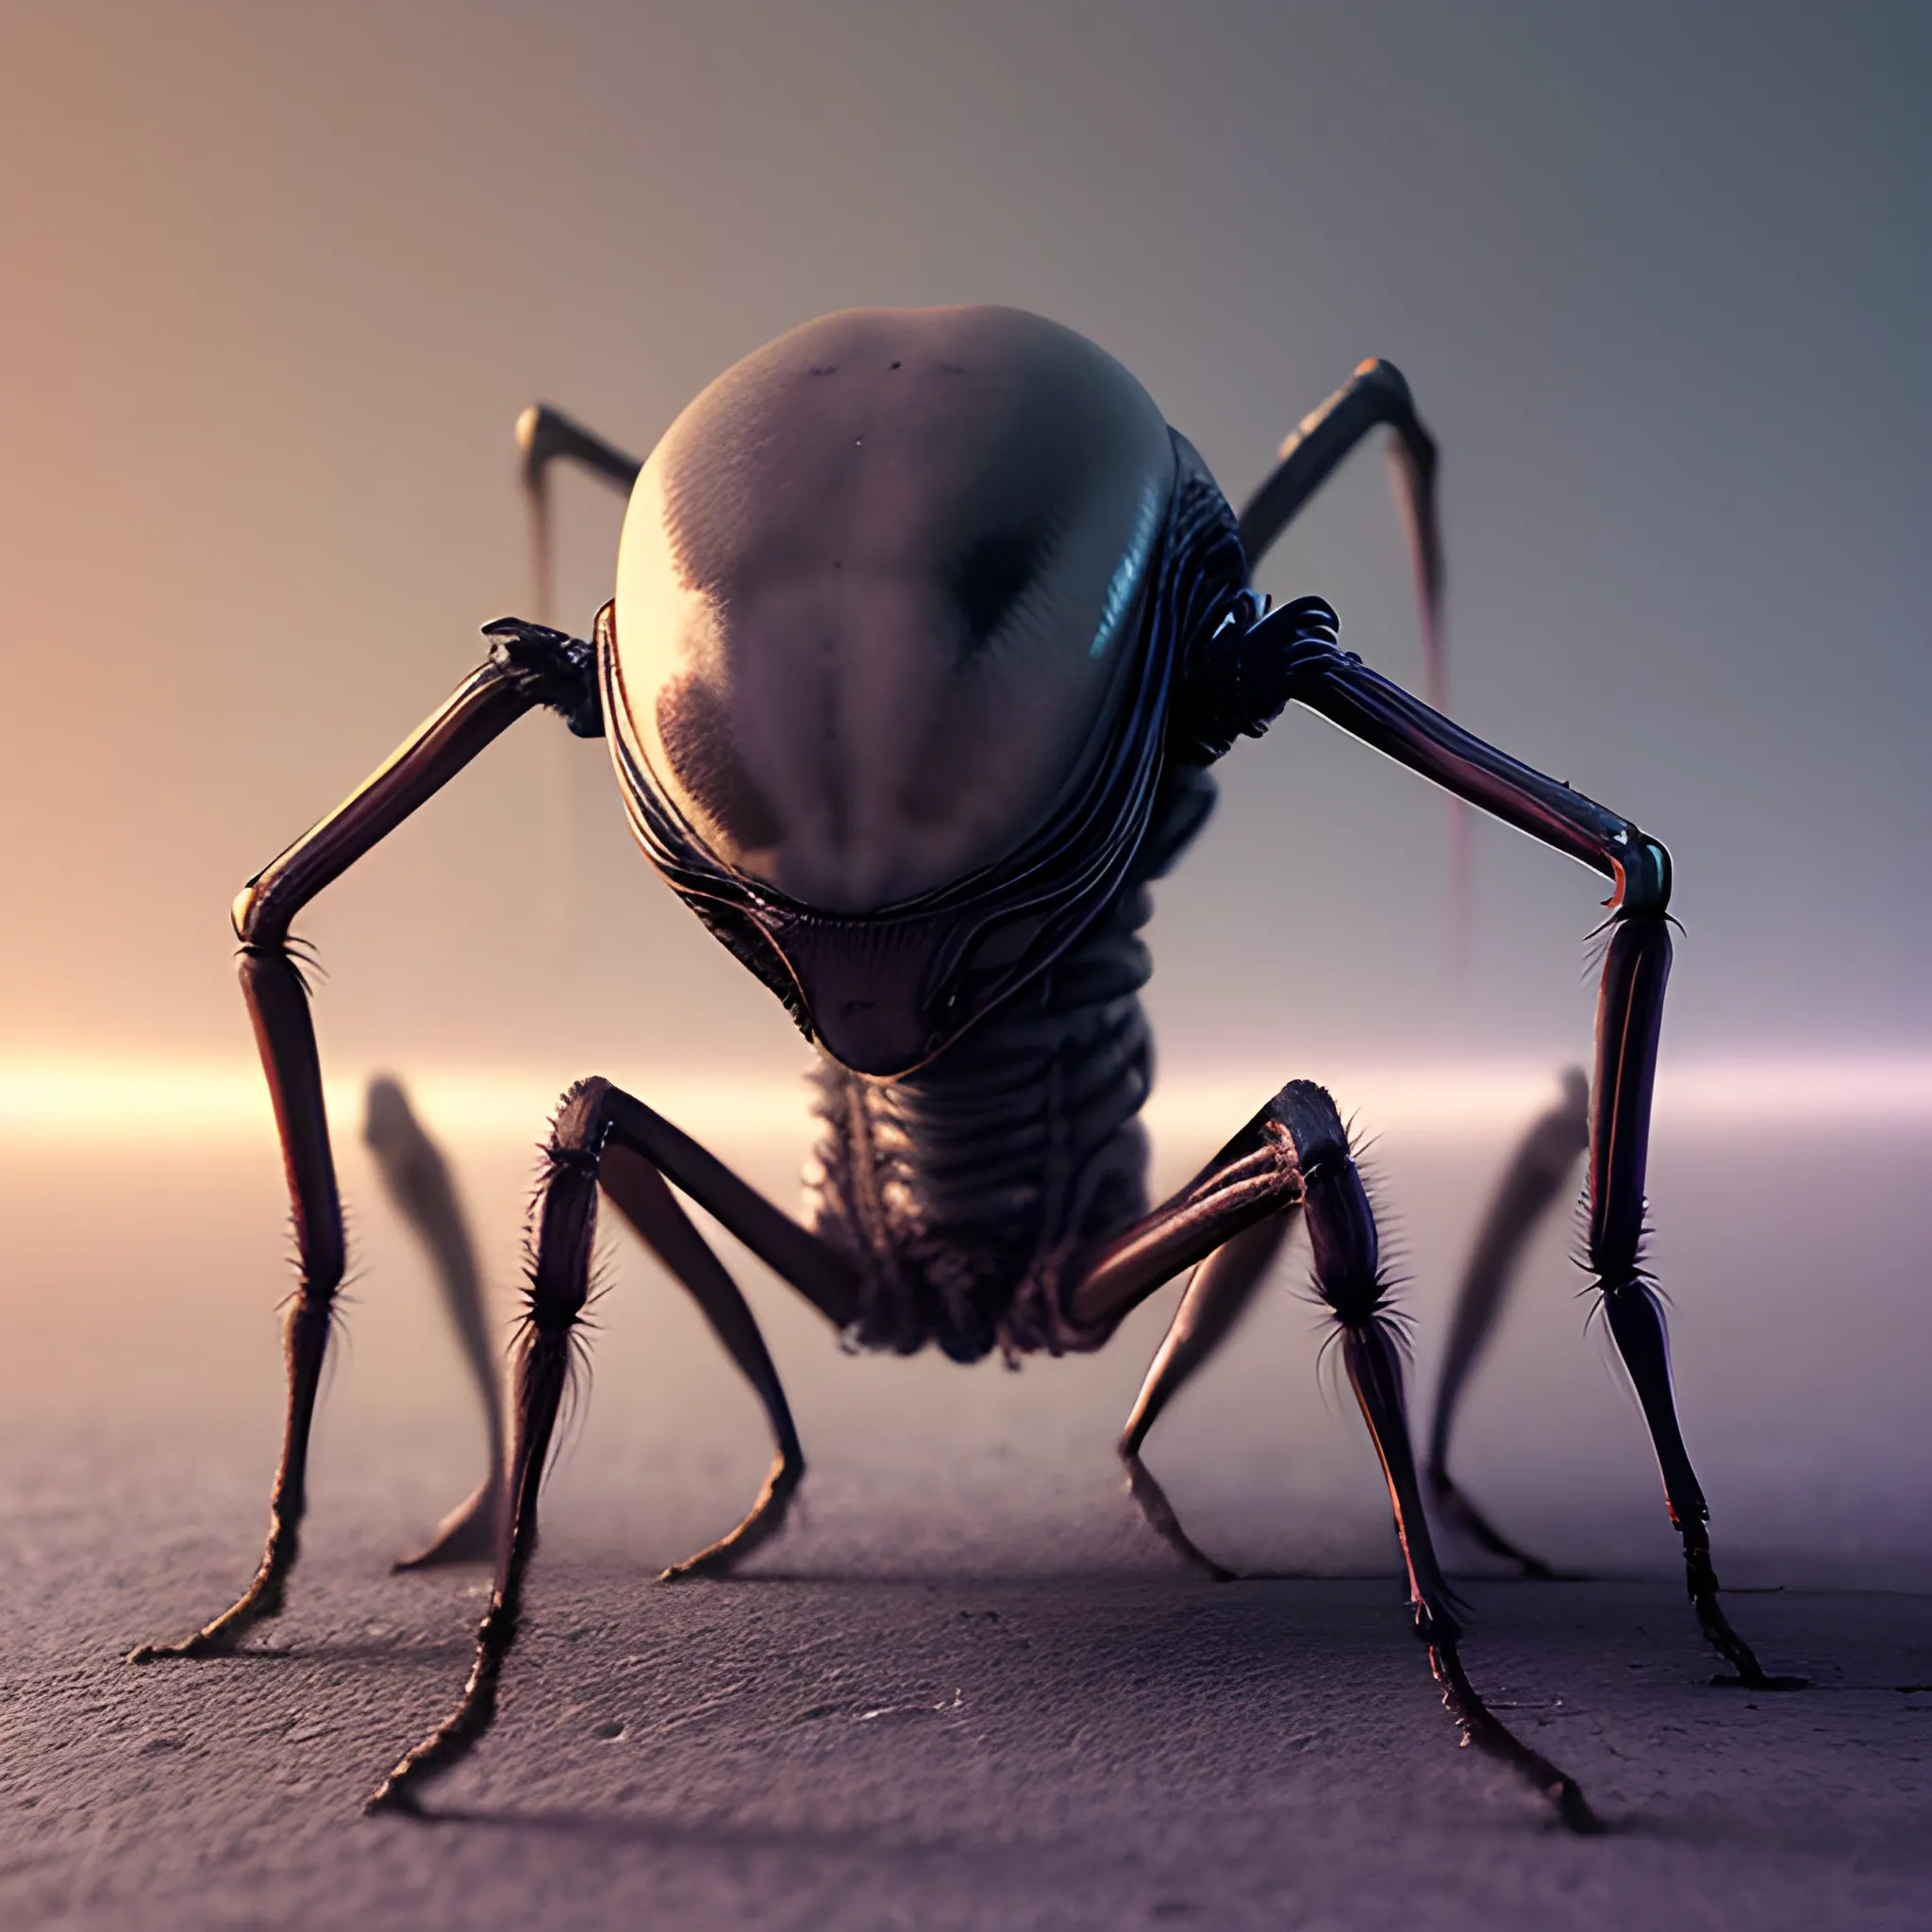 A high resolution, cinematic photo of a alien with spider legs coming put of it's head